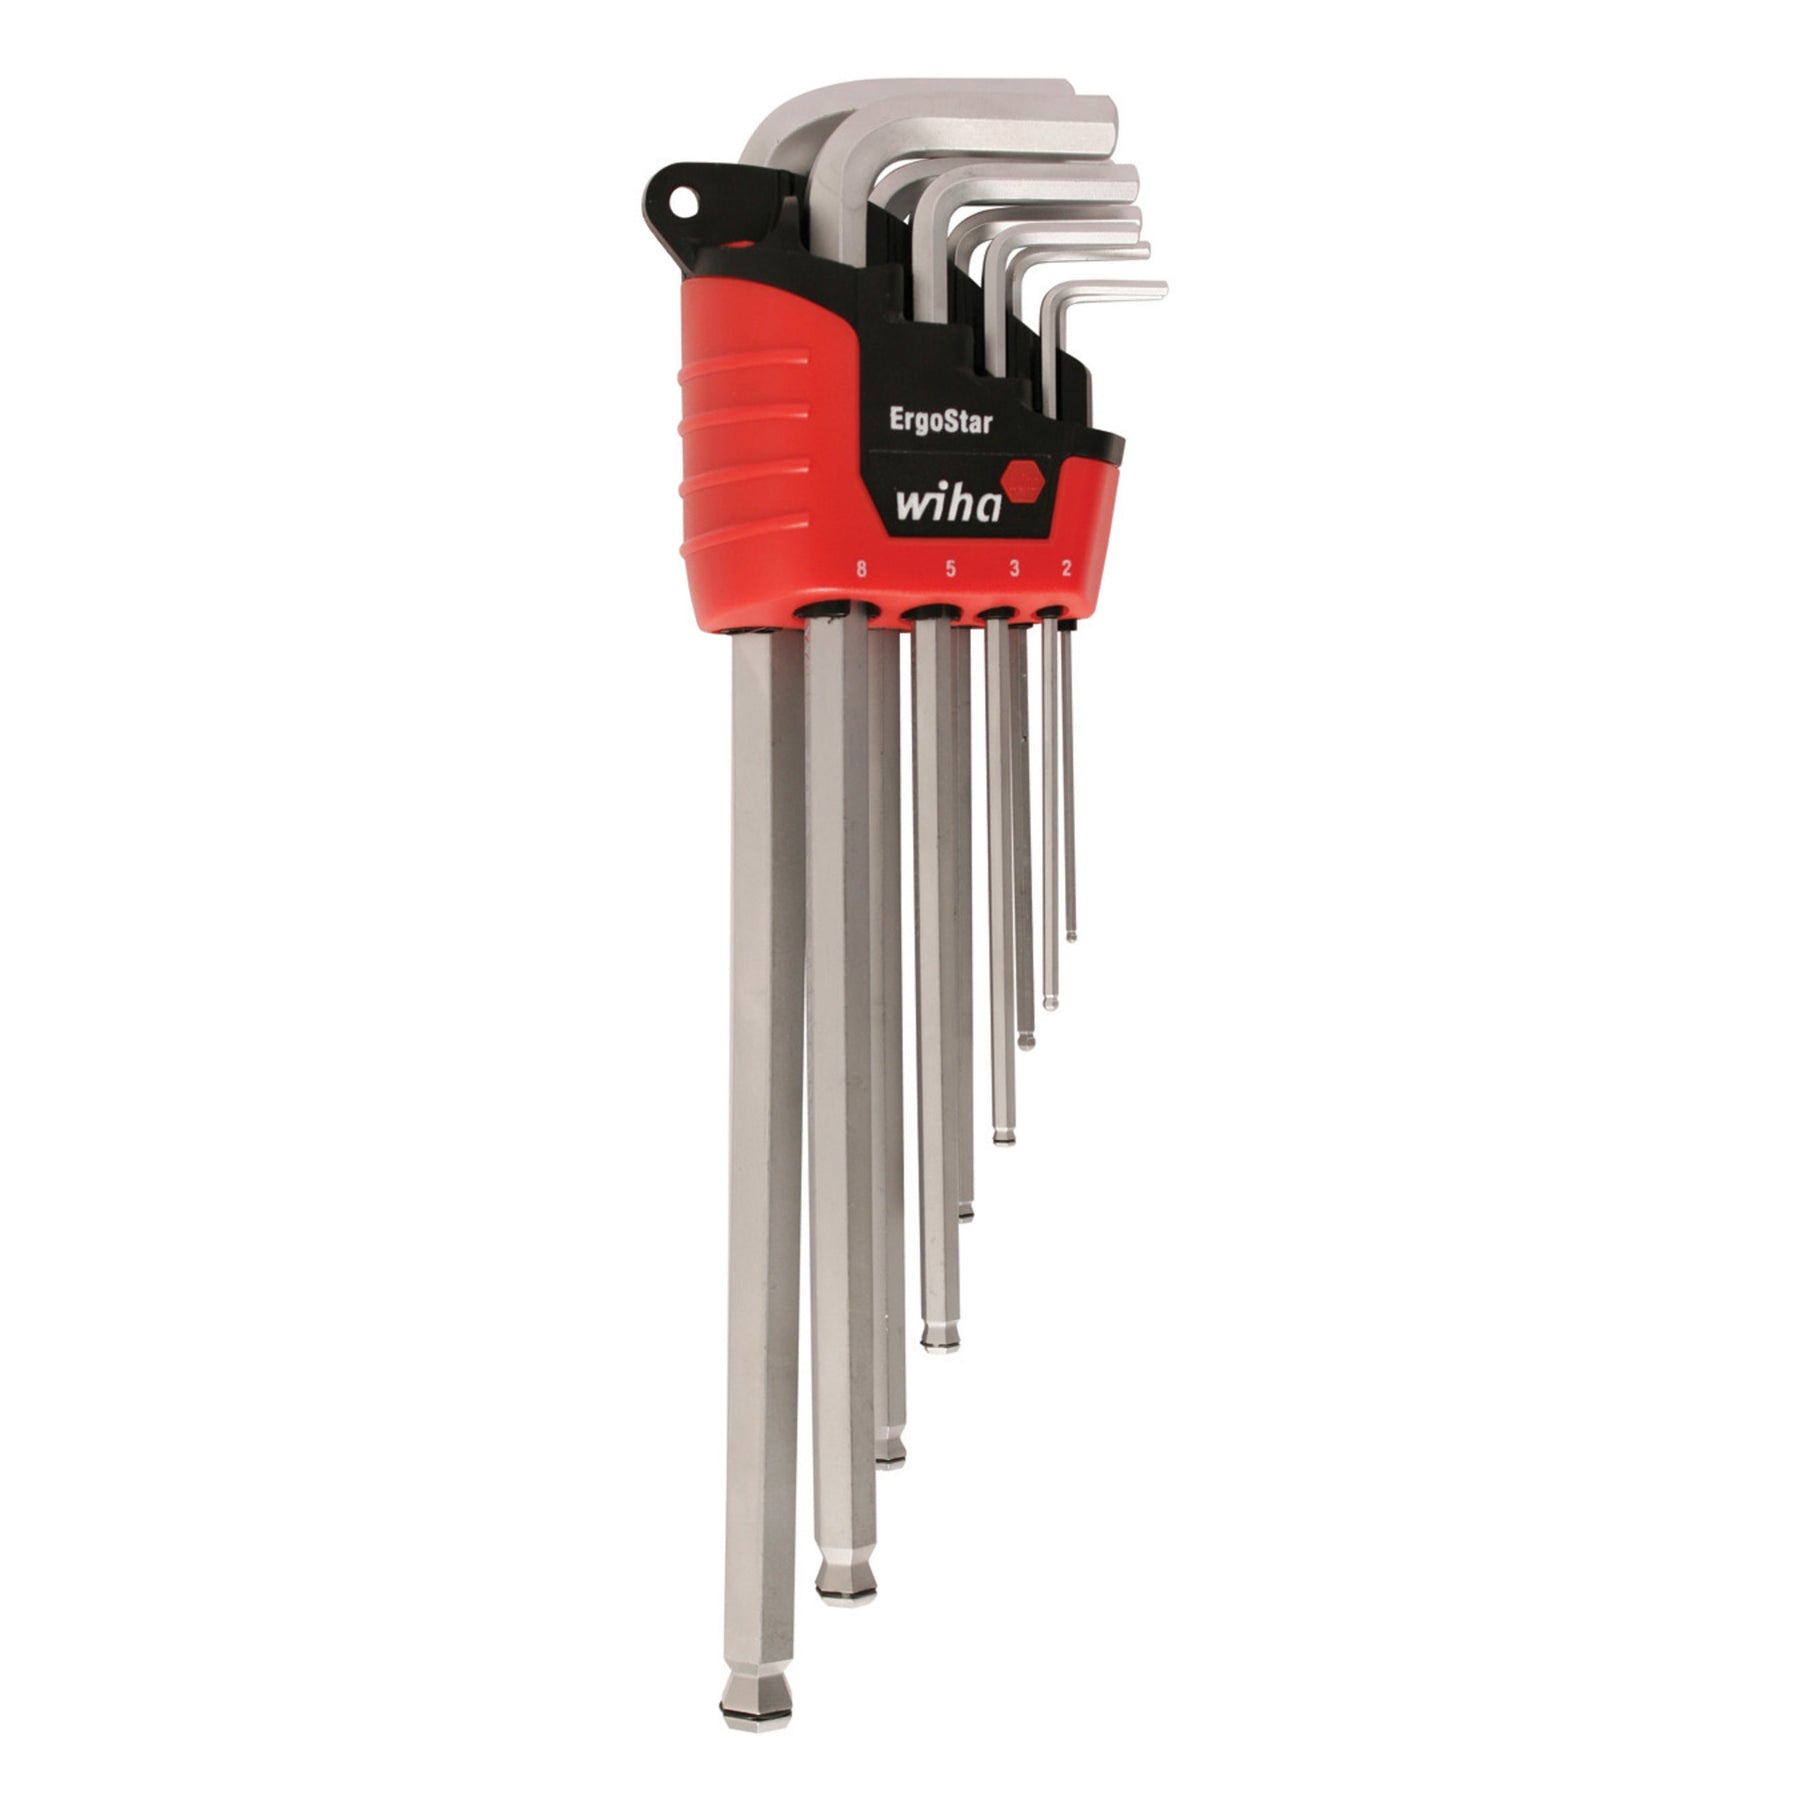 Metric Fasteners - Socket Screw Hex Key and Nut Wrench Size